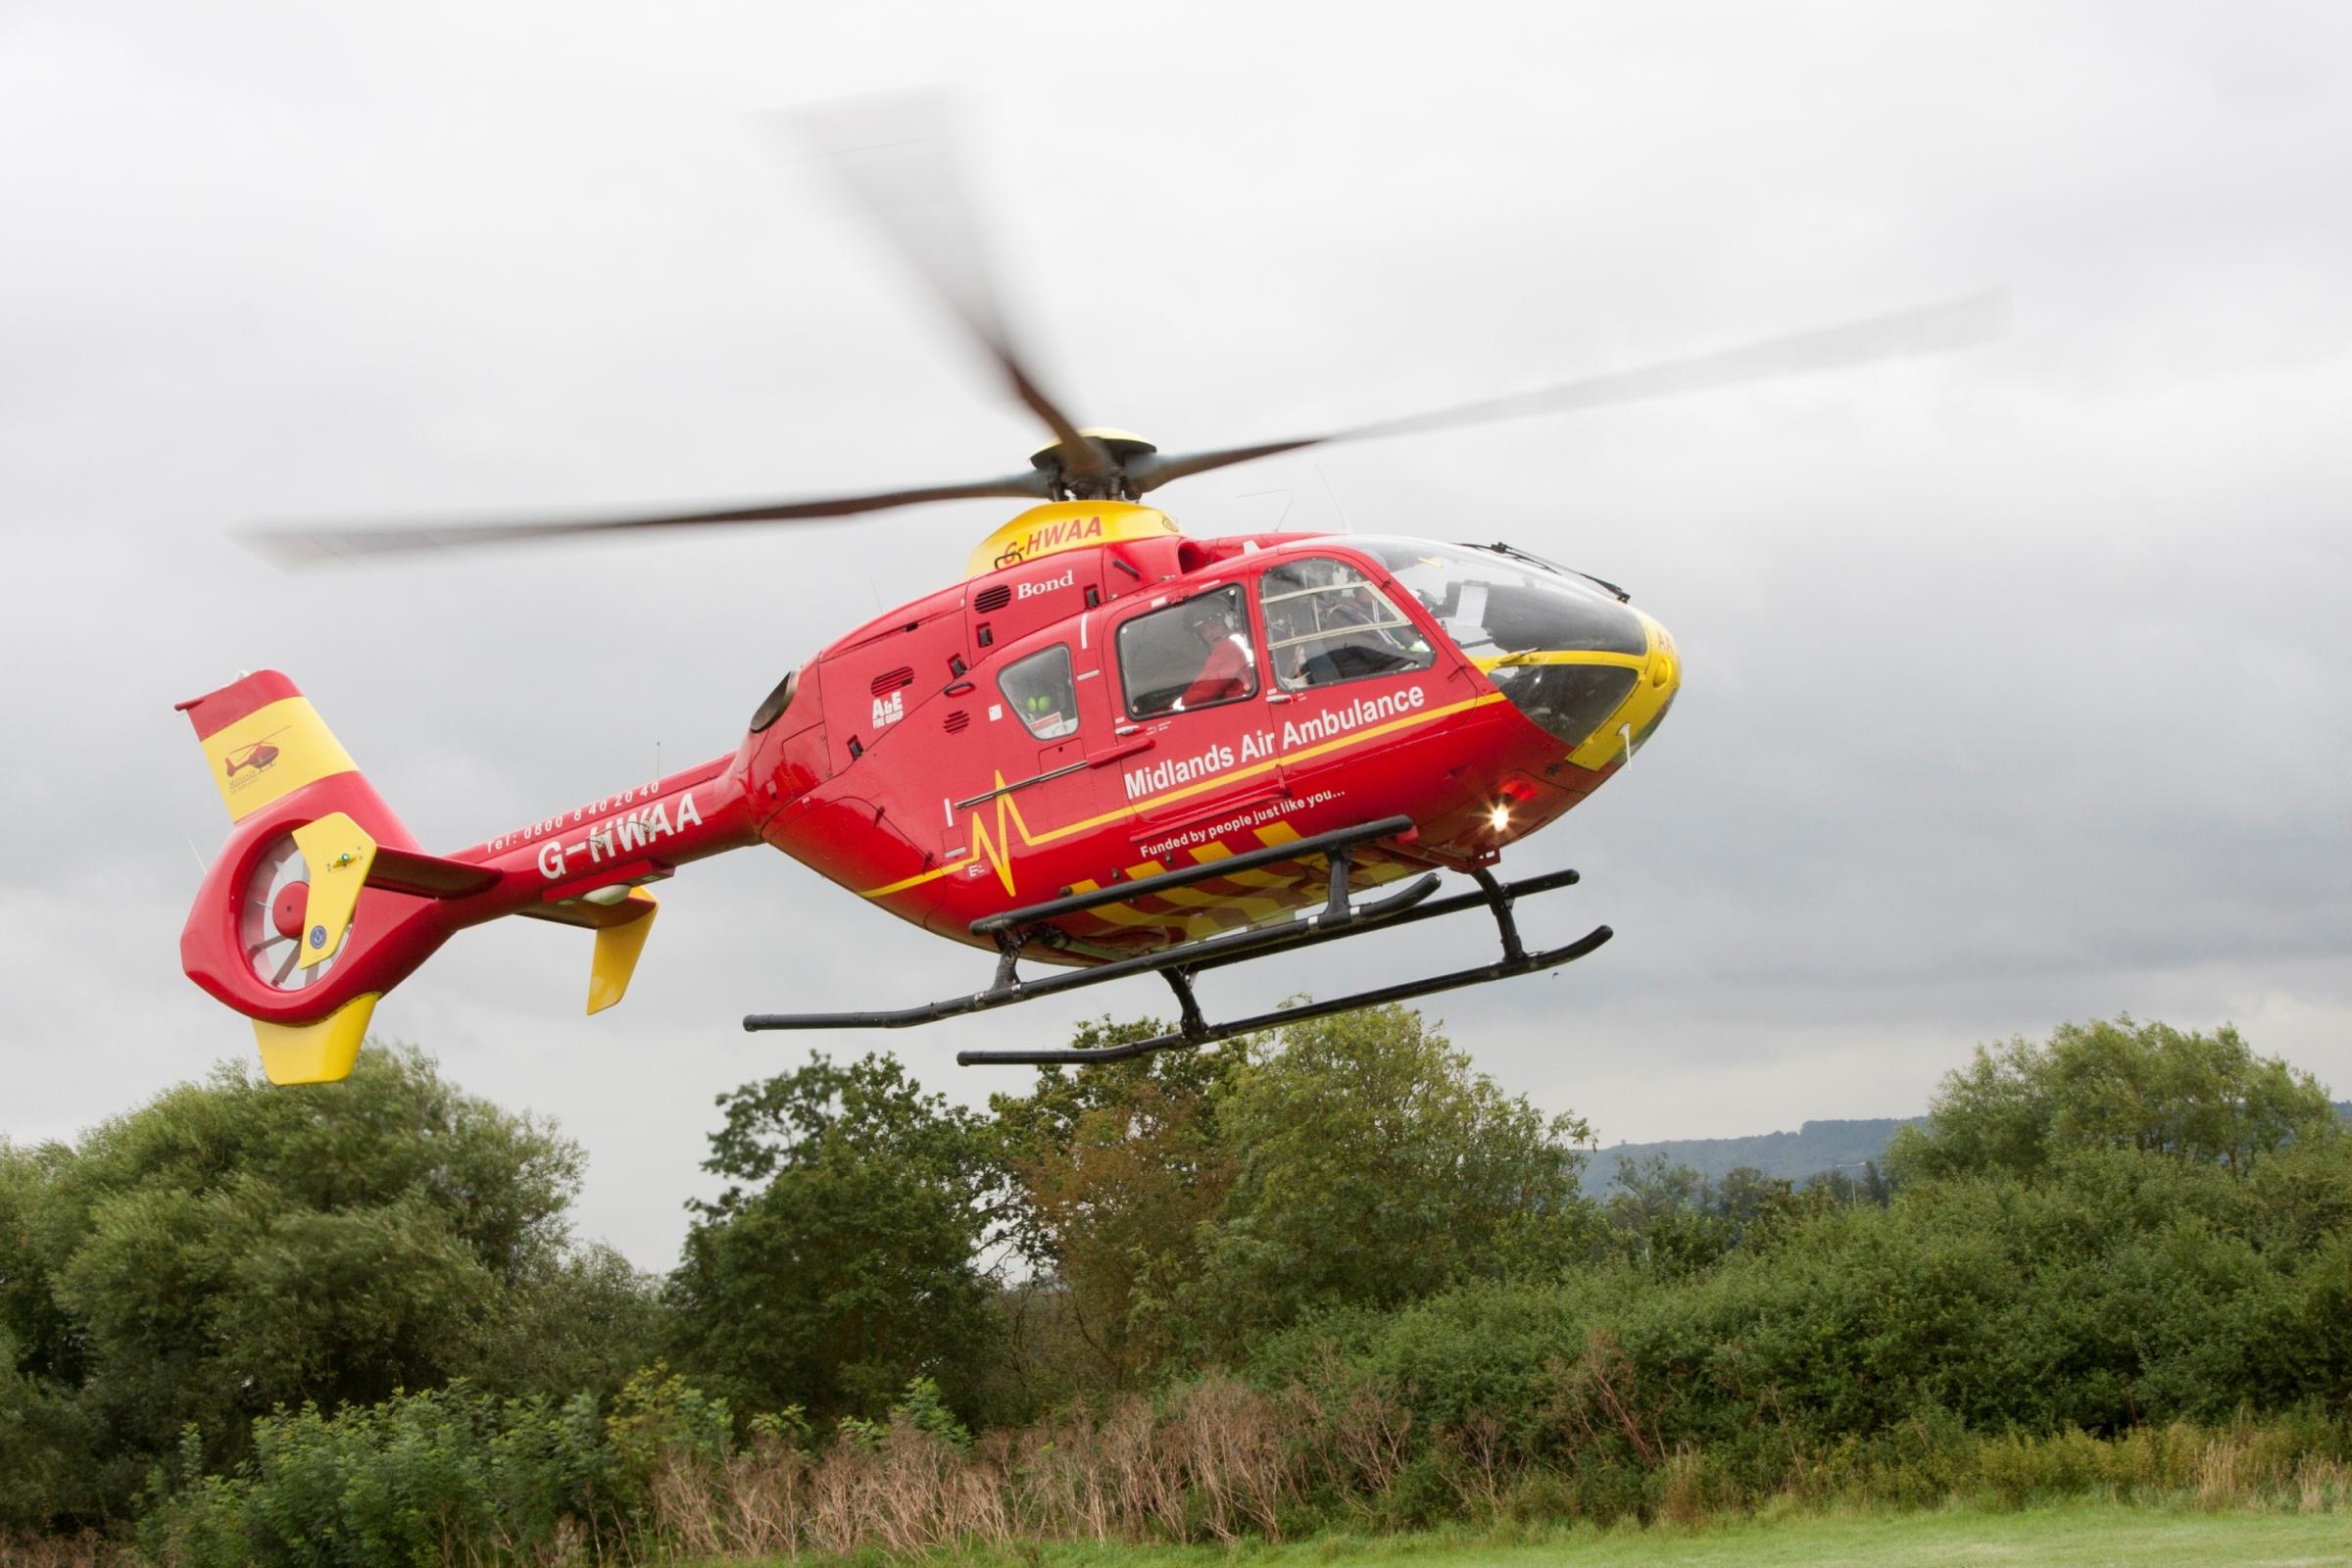 Girl, 12, airlifted by Midlands Air Ambulance after 'freak' rock climbing accident at Symonds Yat, on Herefordshire ... - Malvern Gazette